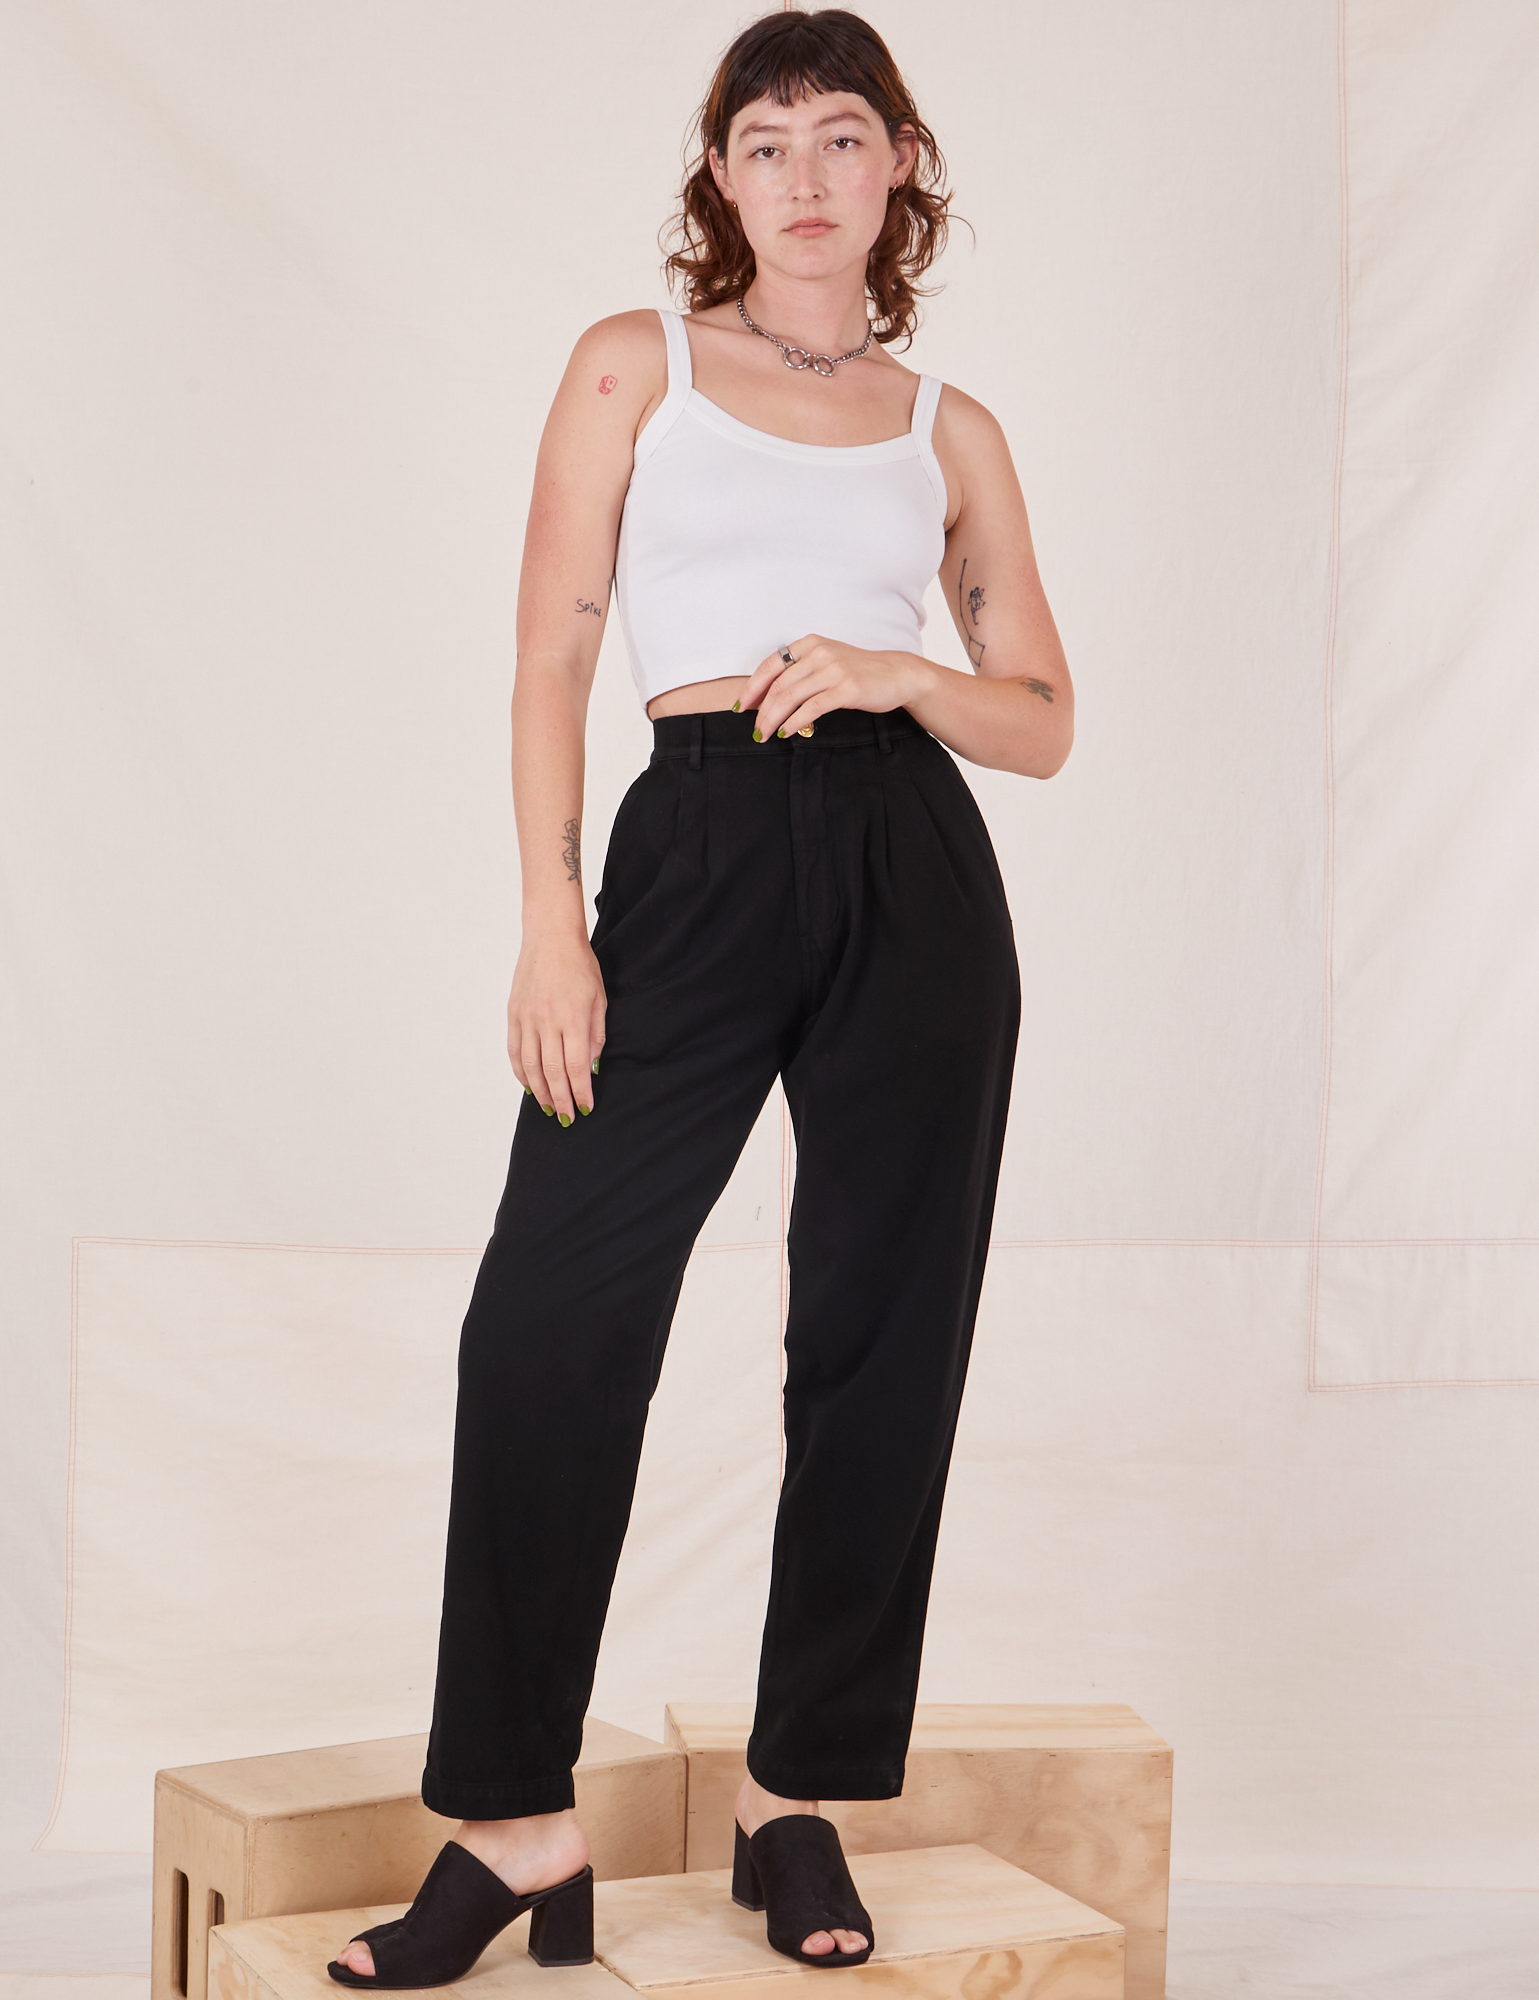 Alex is 5'8" and wearing XXS Organic Trousers in Basic Black paired with Cropped Cami in vintage tee off-white